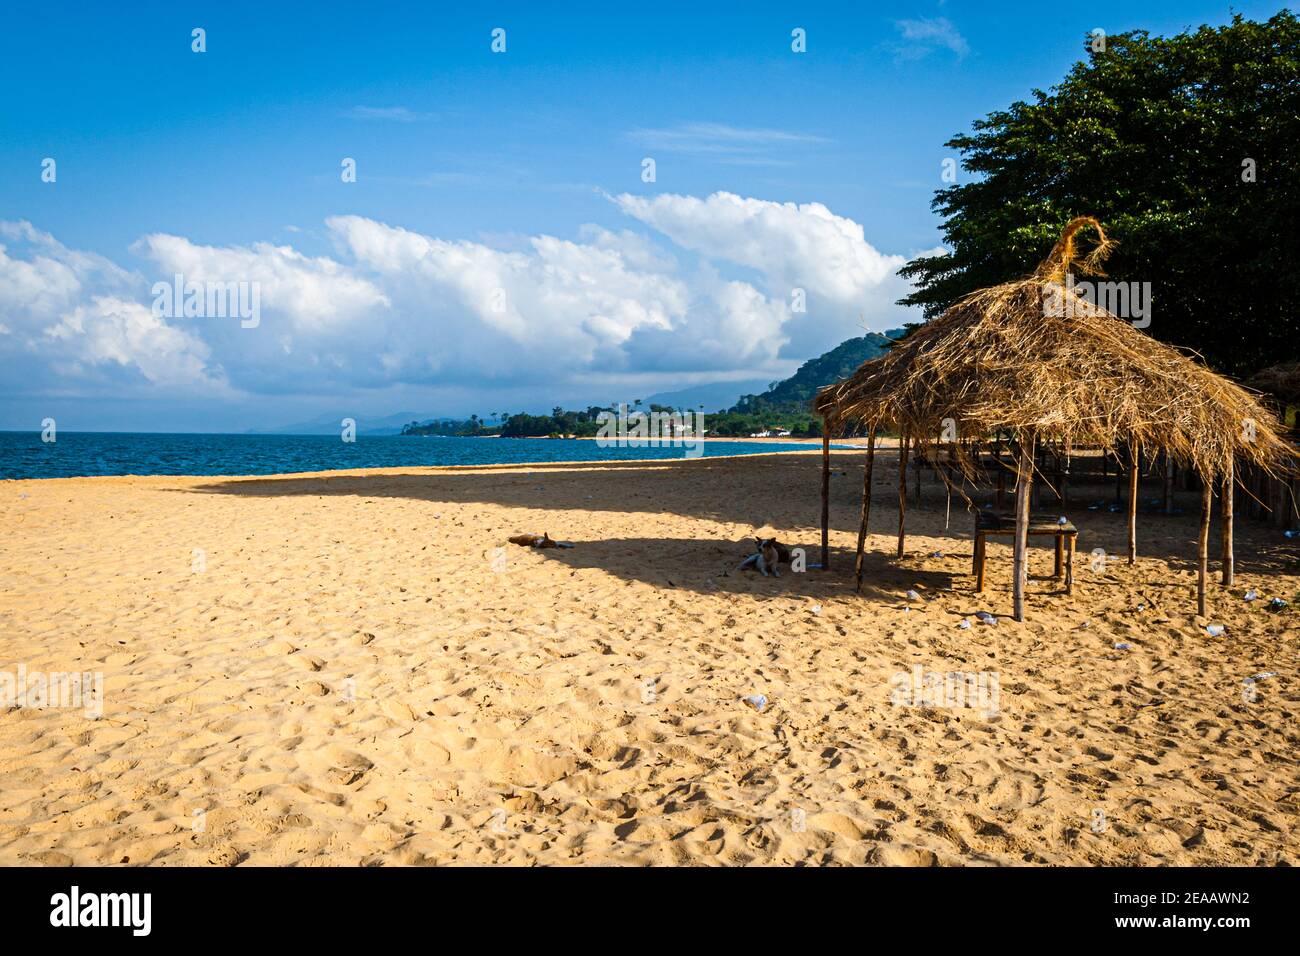 On the coasts of Western Area Rural (Sierra Leone) the rainforest reaches to the beautiful beaches Stock Photo